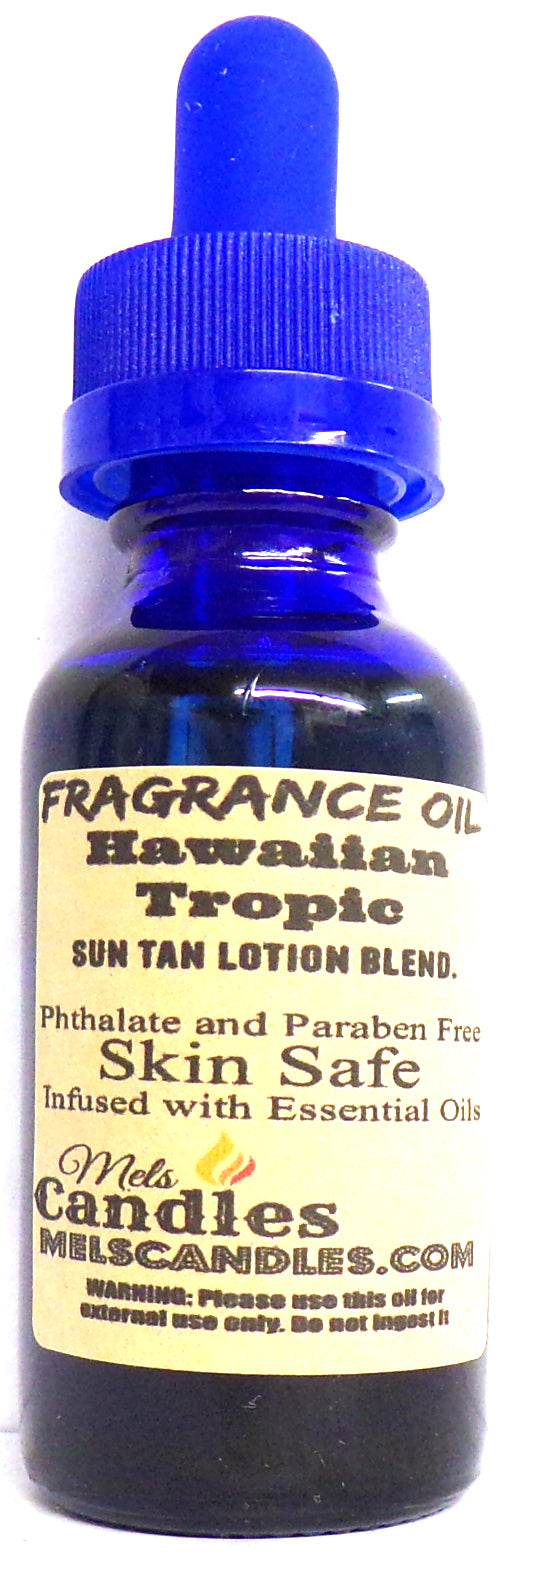 Hawaiian Tropic 1 Ounce / 29.5 ml Bottle of Fragrance oil - mels-candles-more